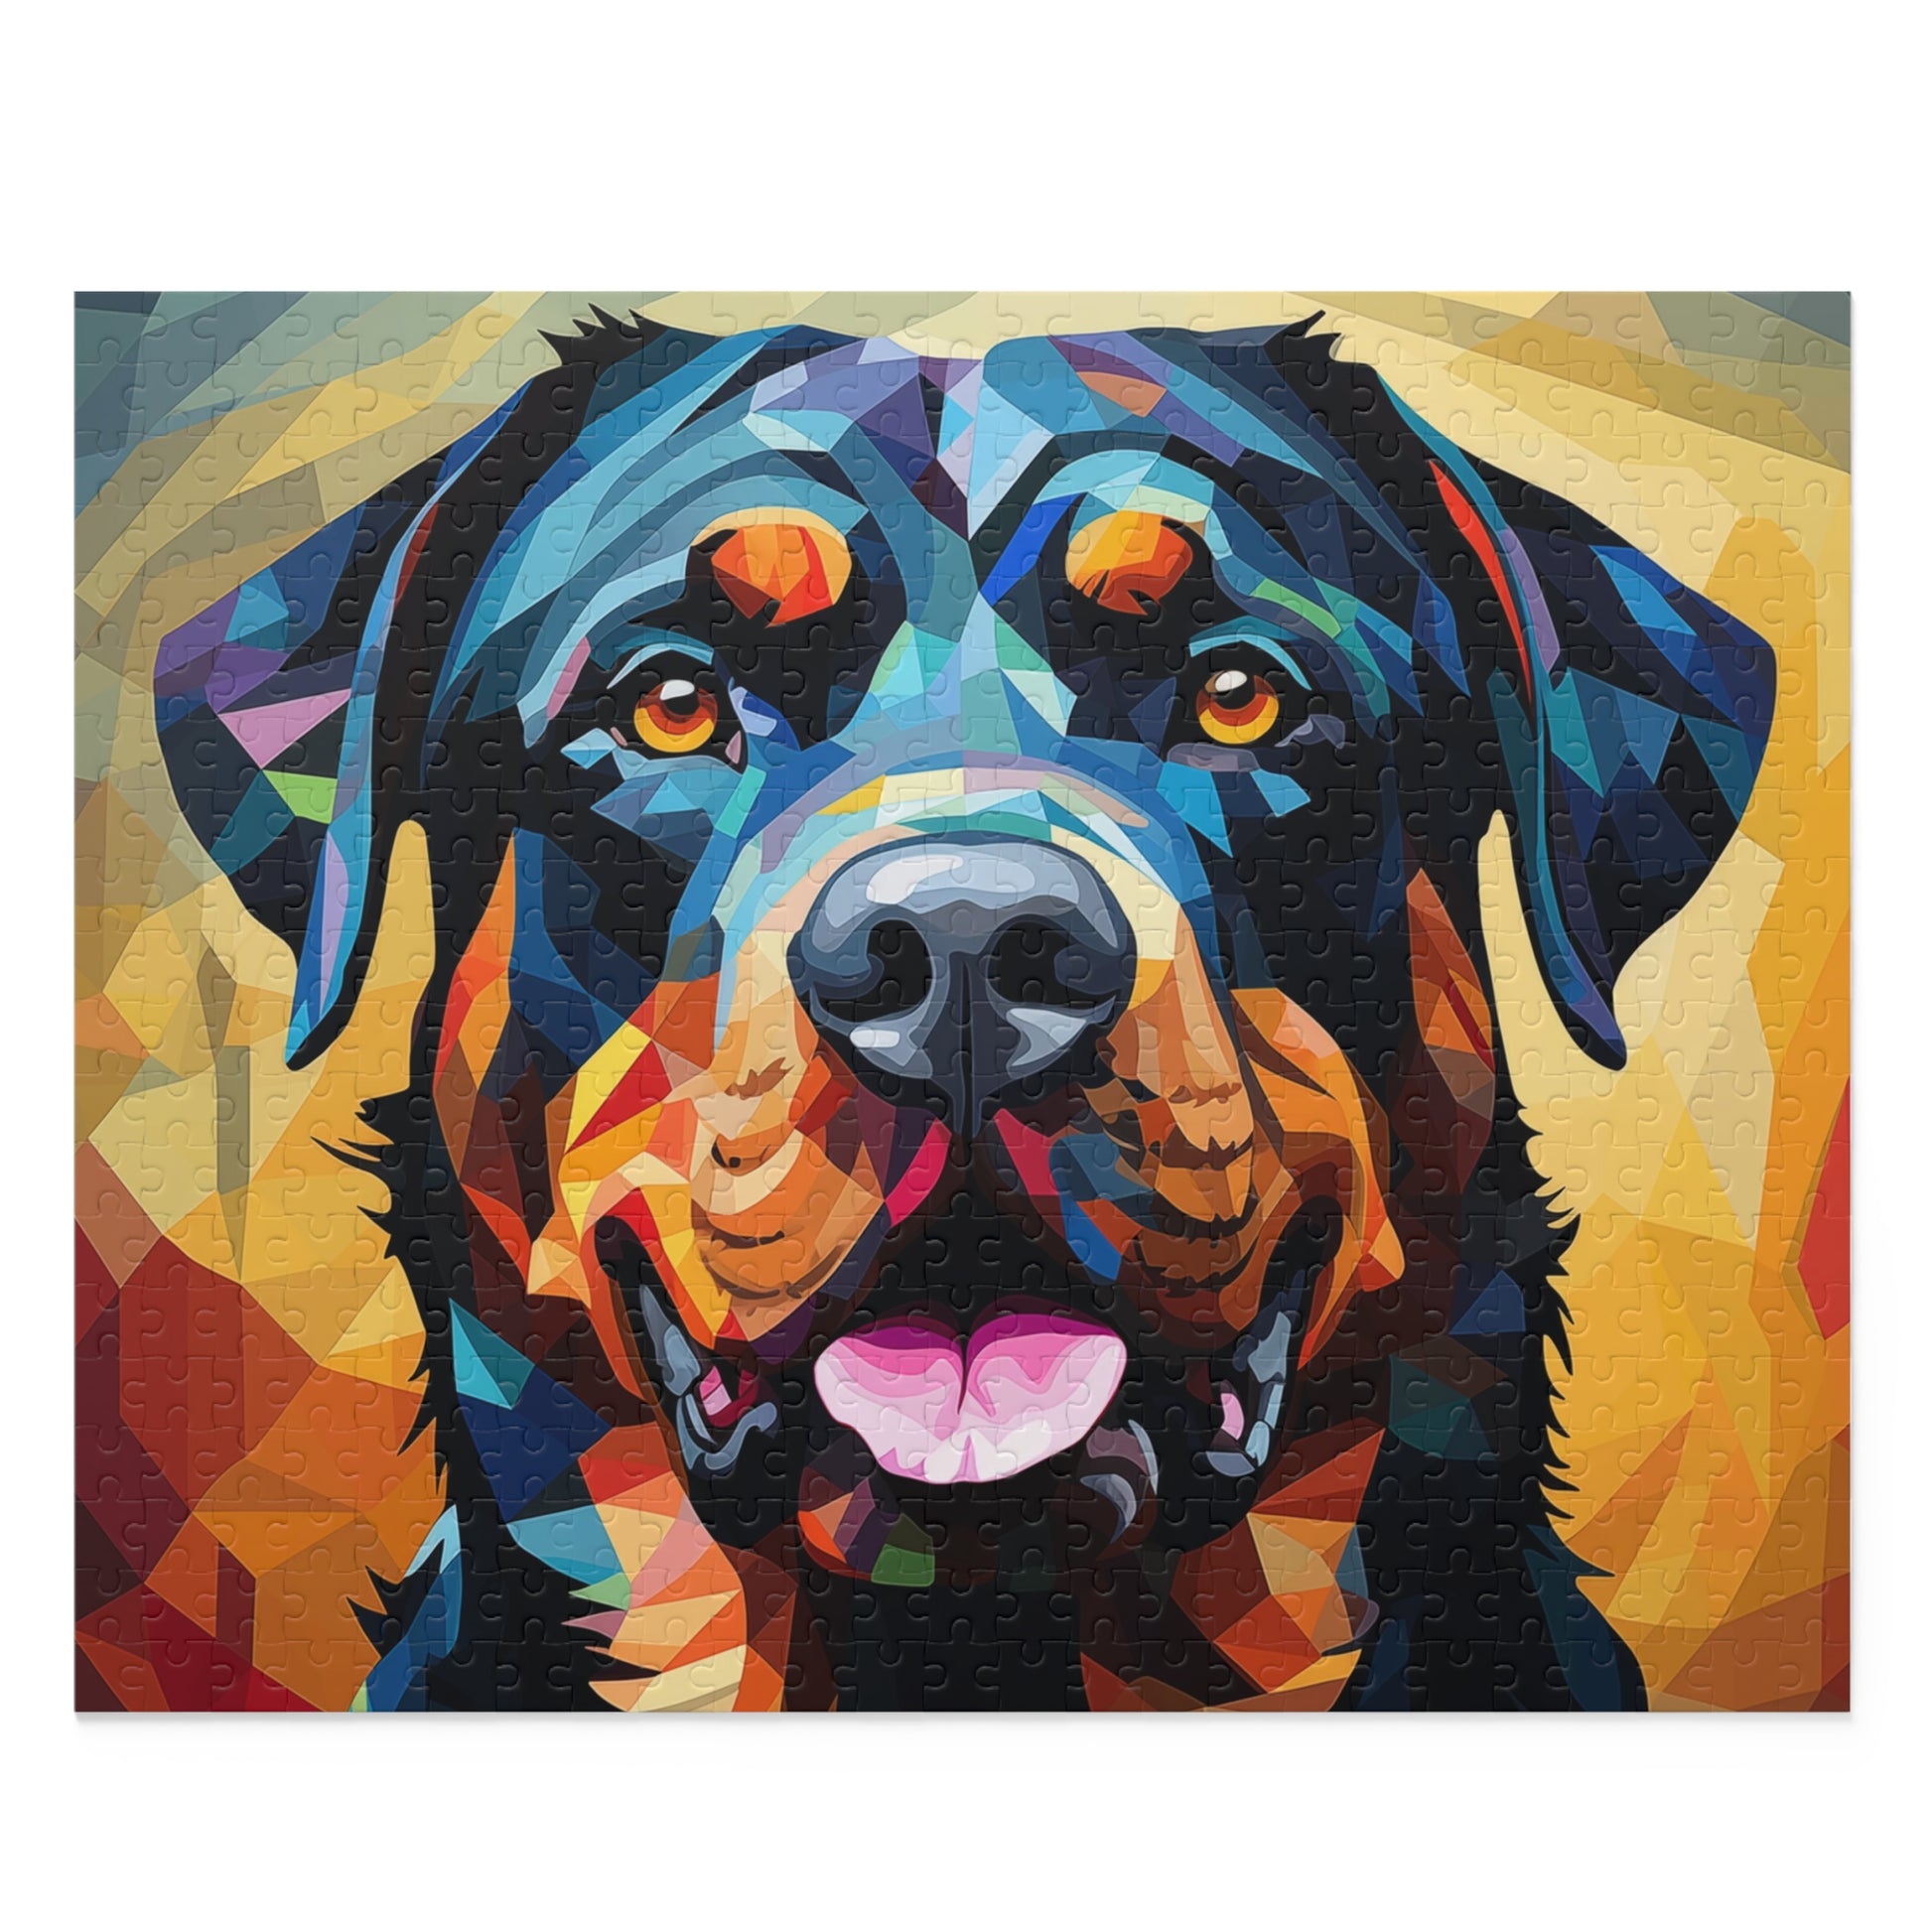 Rottweiler Vibrant Abstract Dog Jigsaw Puzzle Oil Paint Adult Birthday Business Jigsaw Puzzle Gift for Him Funny Humorous Indoor Outdoor Game Gift For Her Online-1